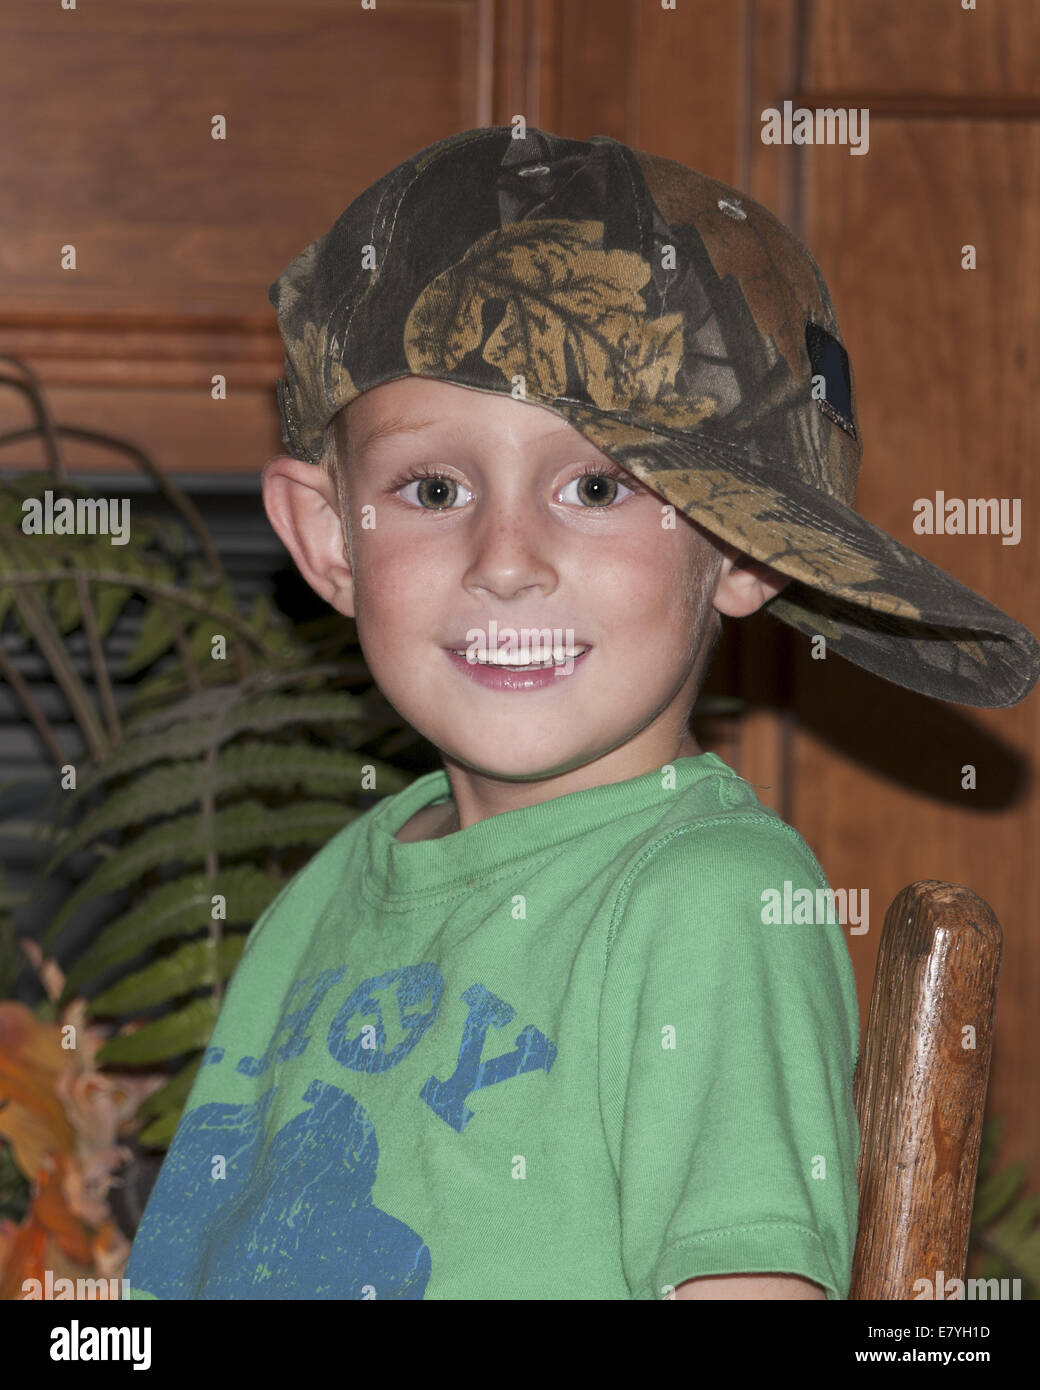 Boy child sitting in a chair inside looking sideways at the camera.  He has on a camo hat that is too big. Stock Photo